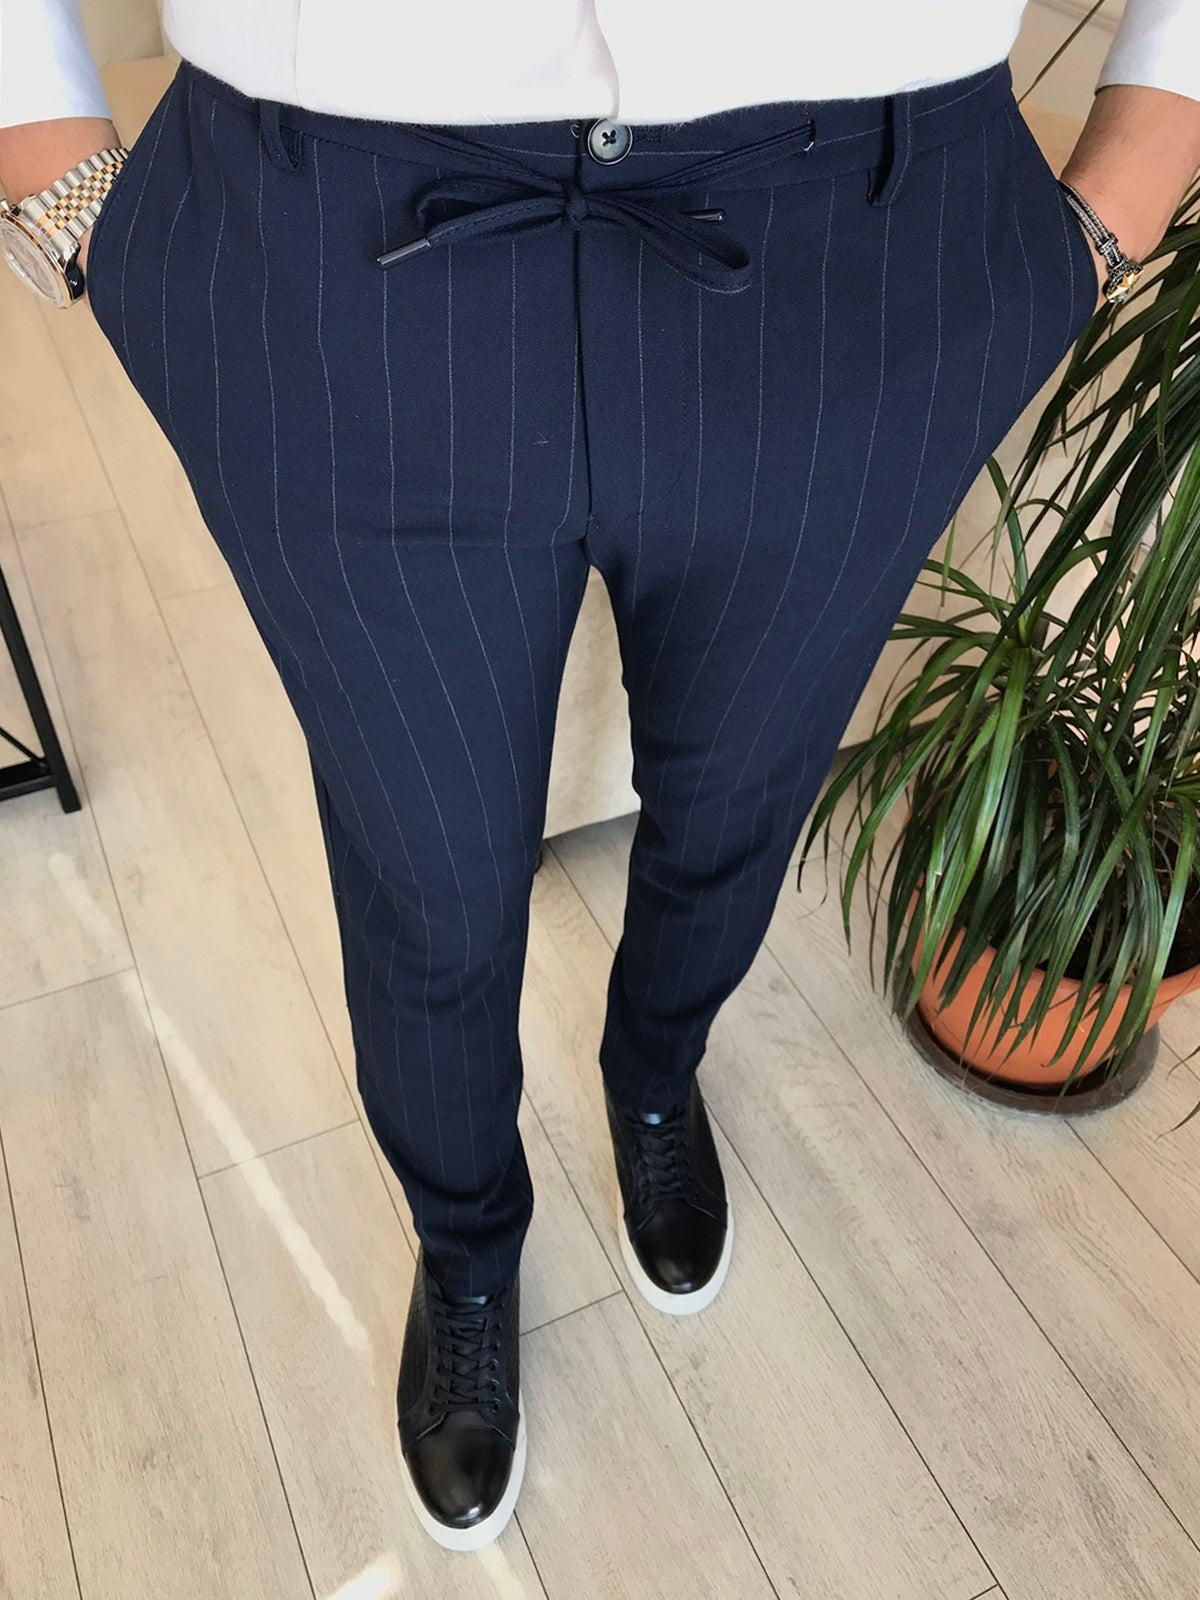 Blue Striped Trousers Mens on Sale - playgrowned.com 1689979348